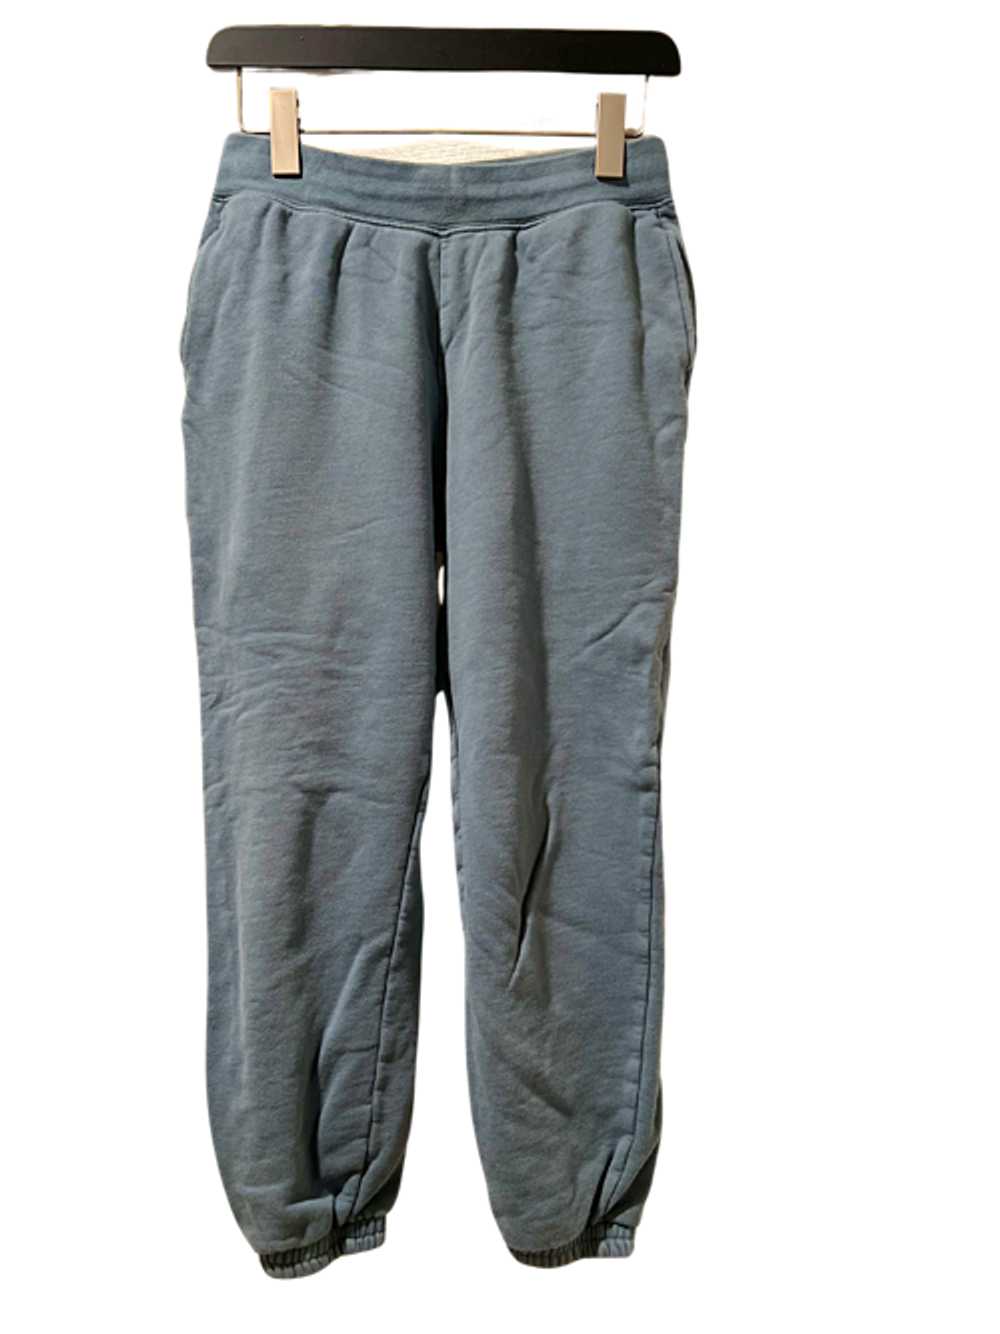 Girlfriend Collective Lagoon 50/50 Classic Jogger - image 4